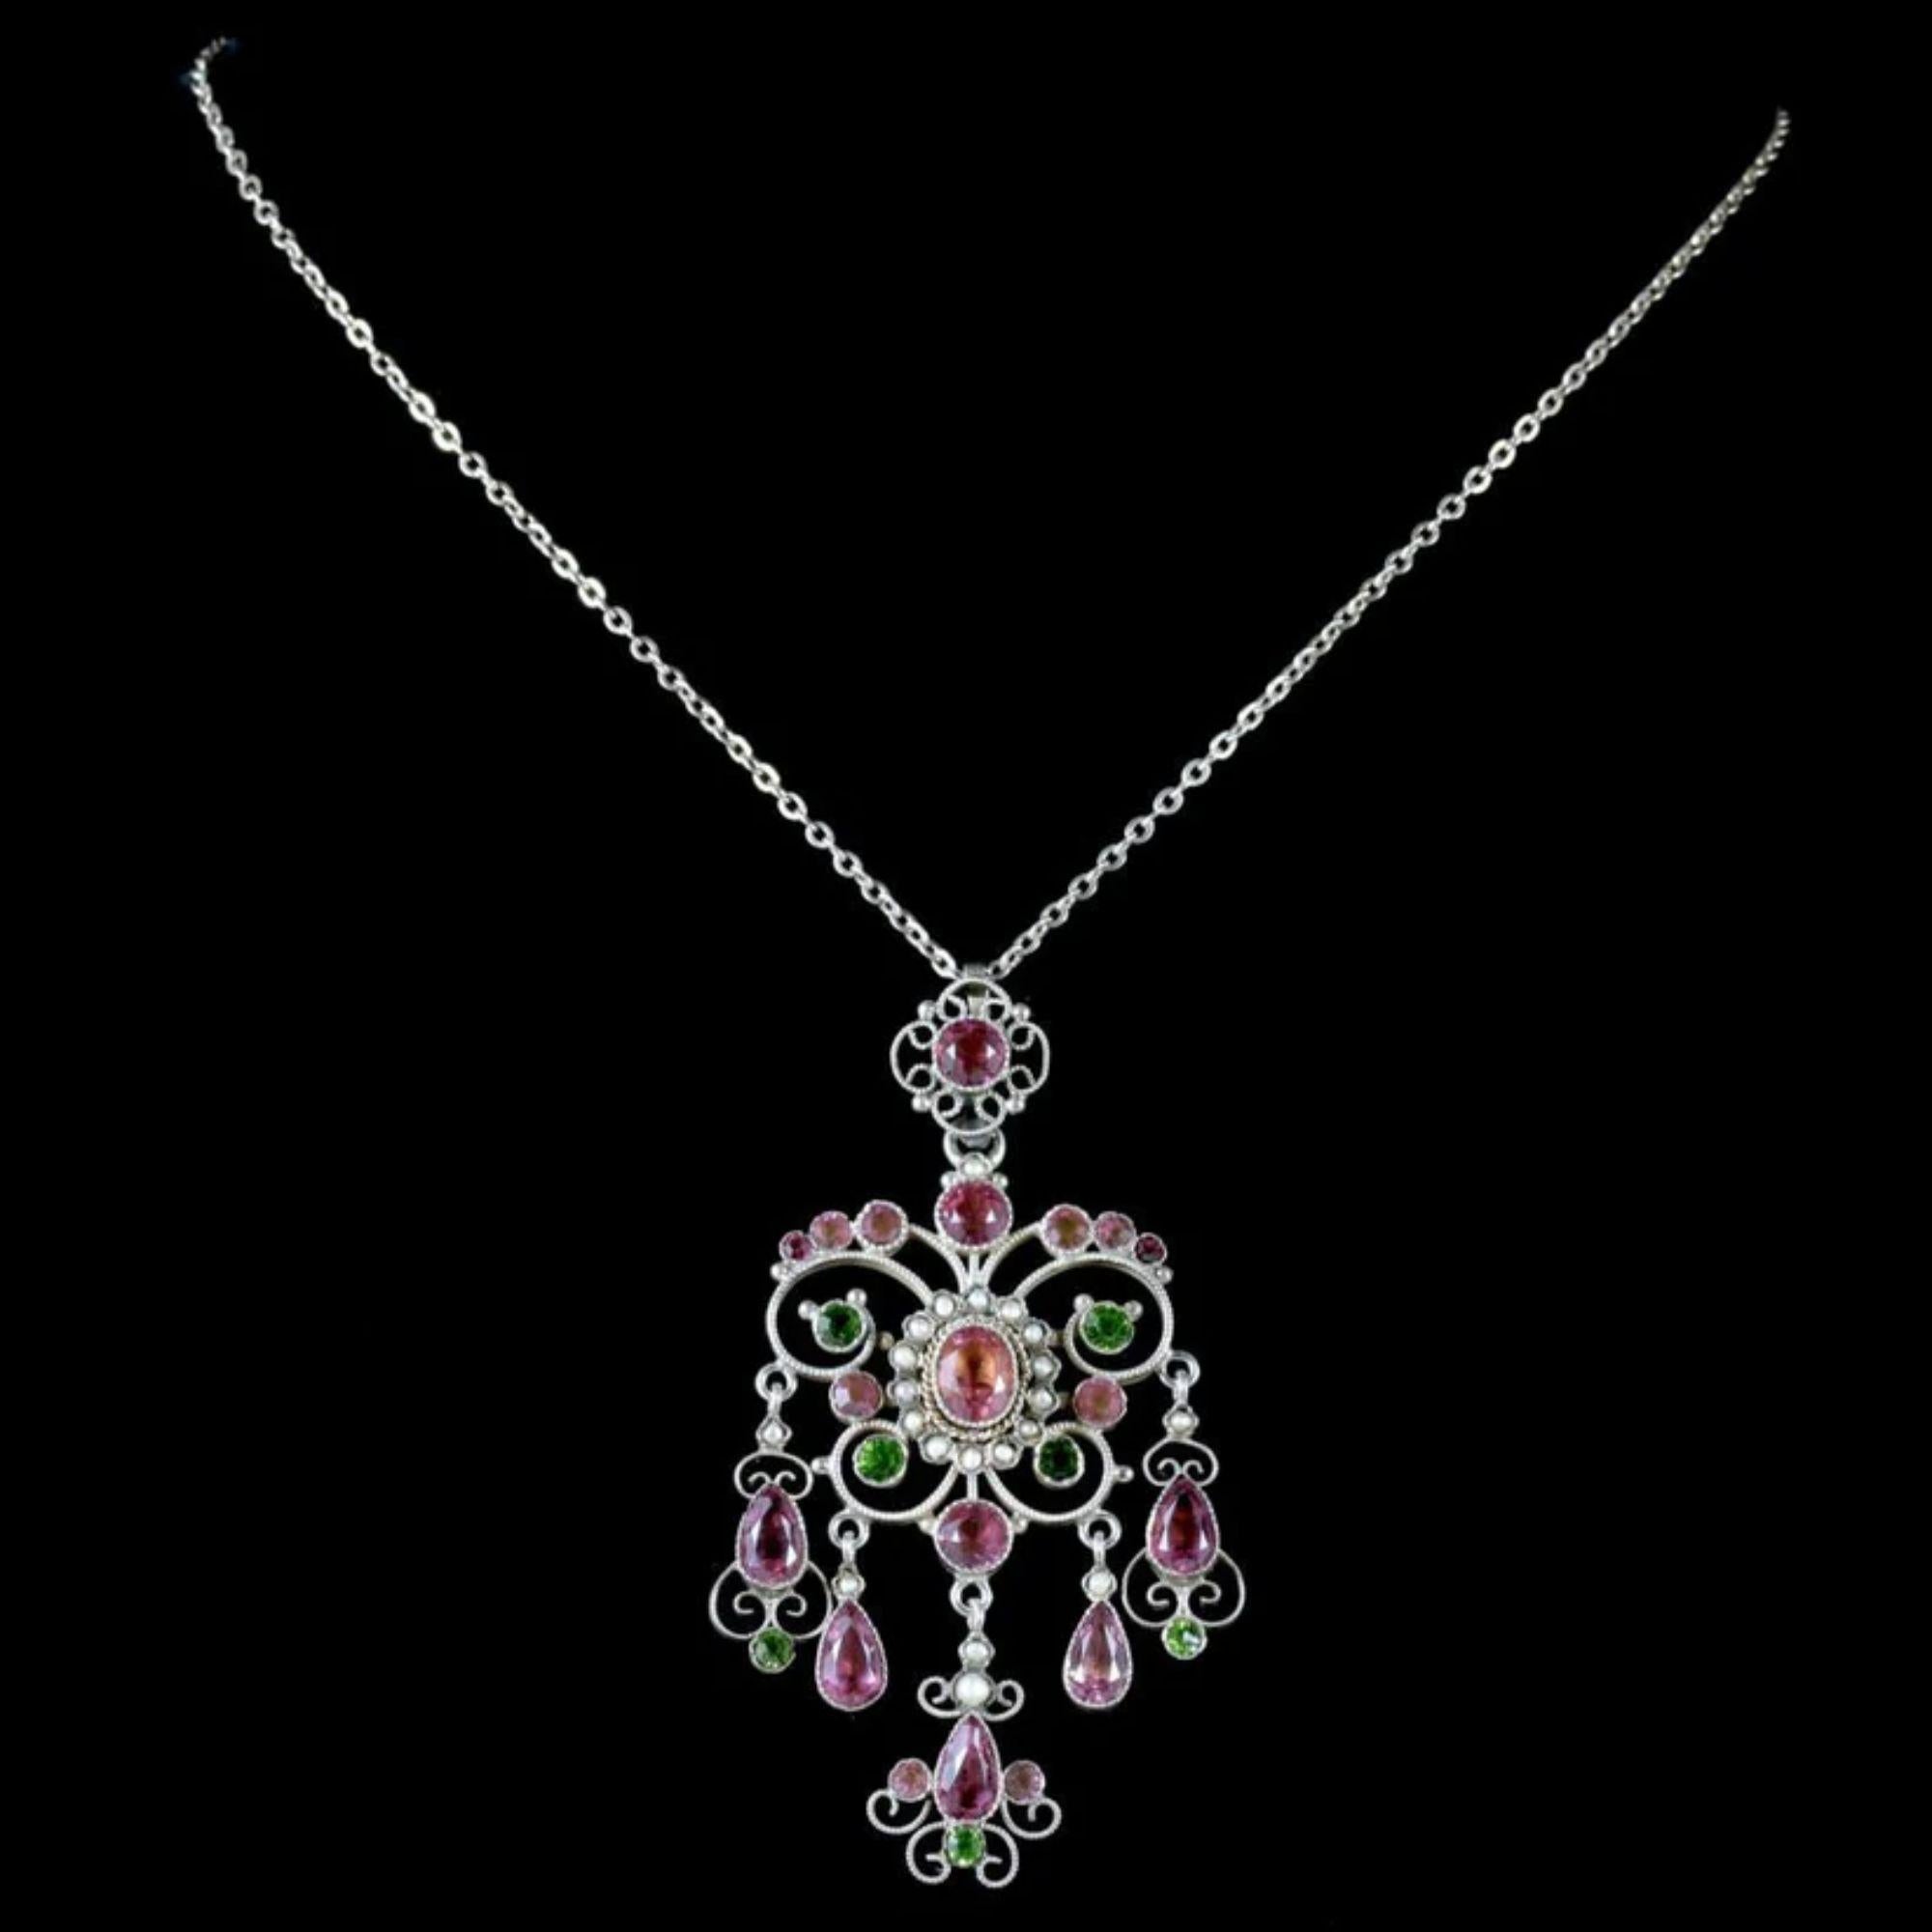 A colourful antique Edwardian pendant made in support of the women’s Suffrage movement in the early 20th Century. The silver pendant has an elaborate, open-work design with scrolling motifs and five long droppers hanging from the bottom.

It’s